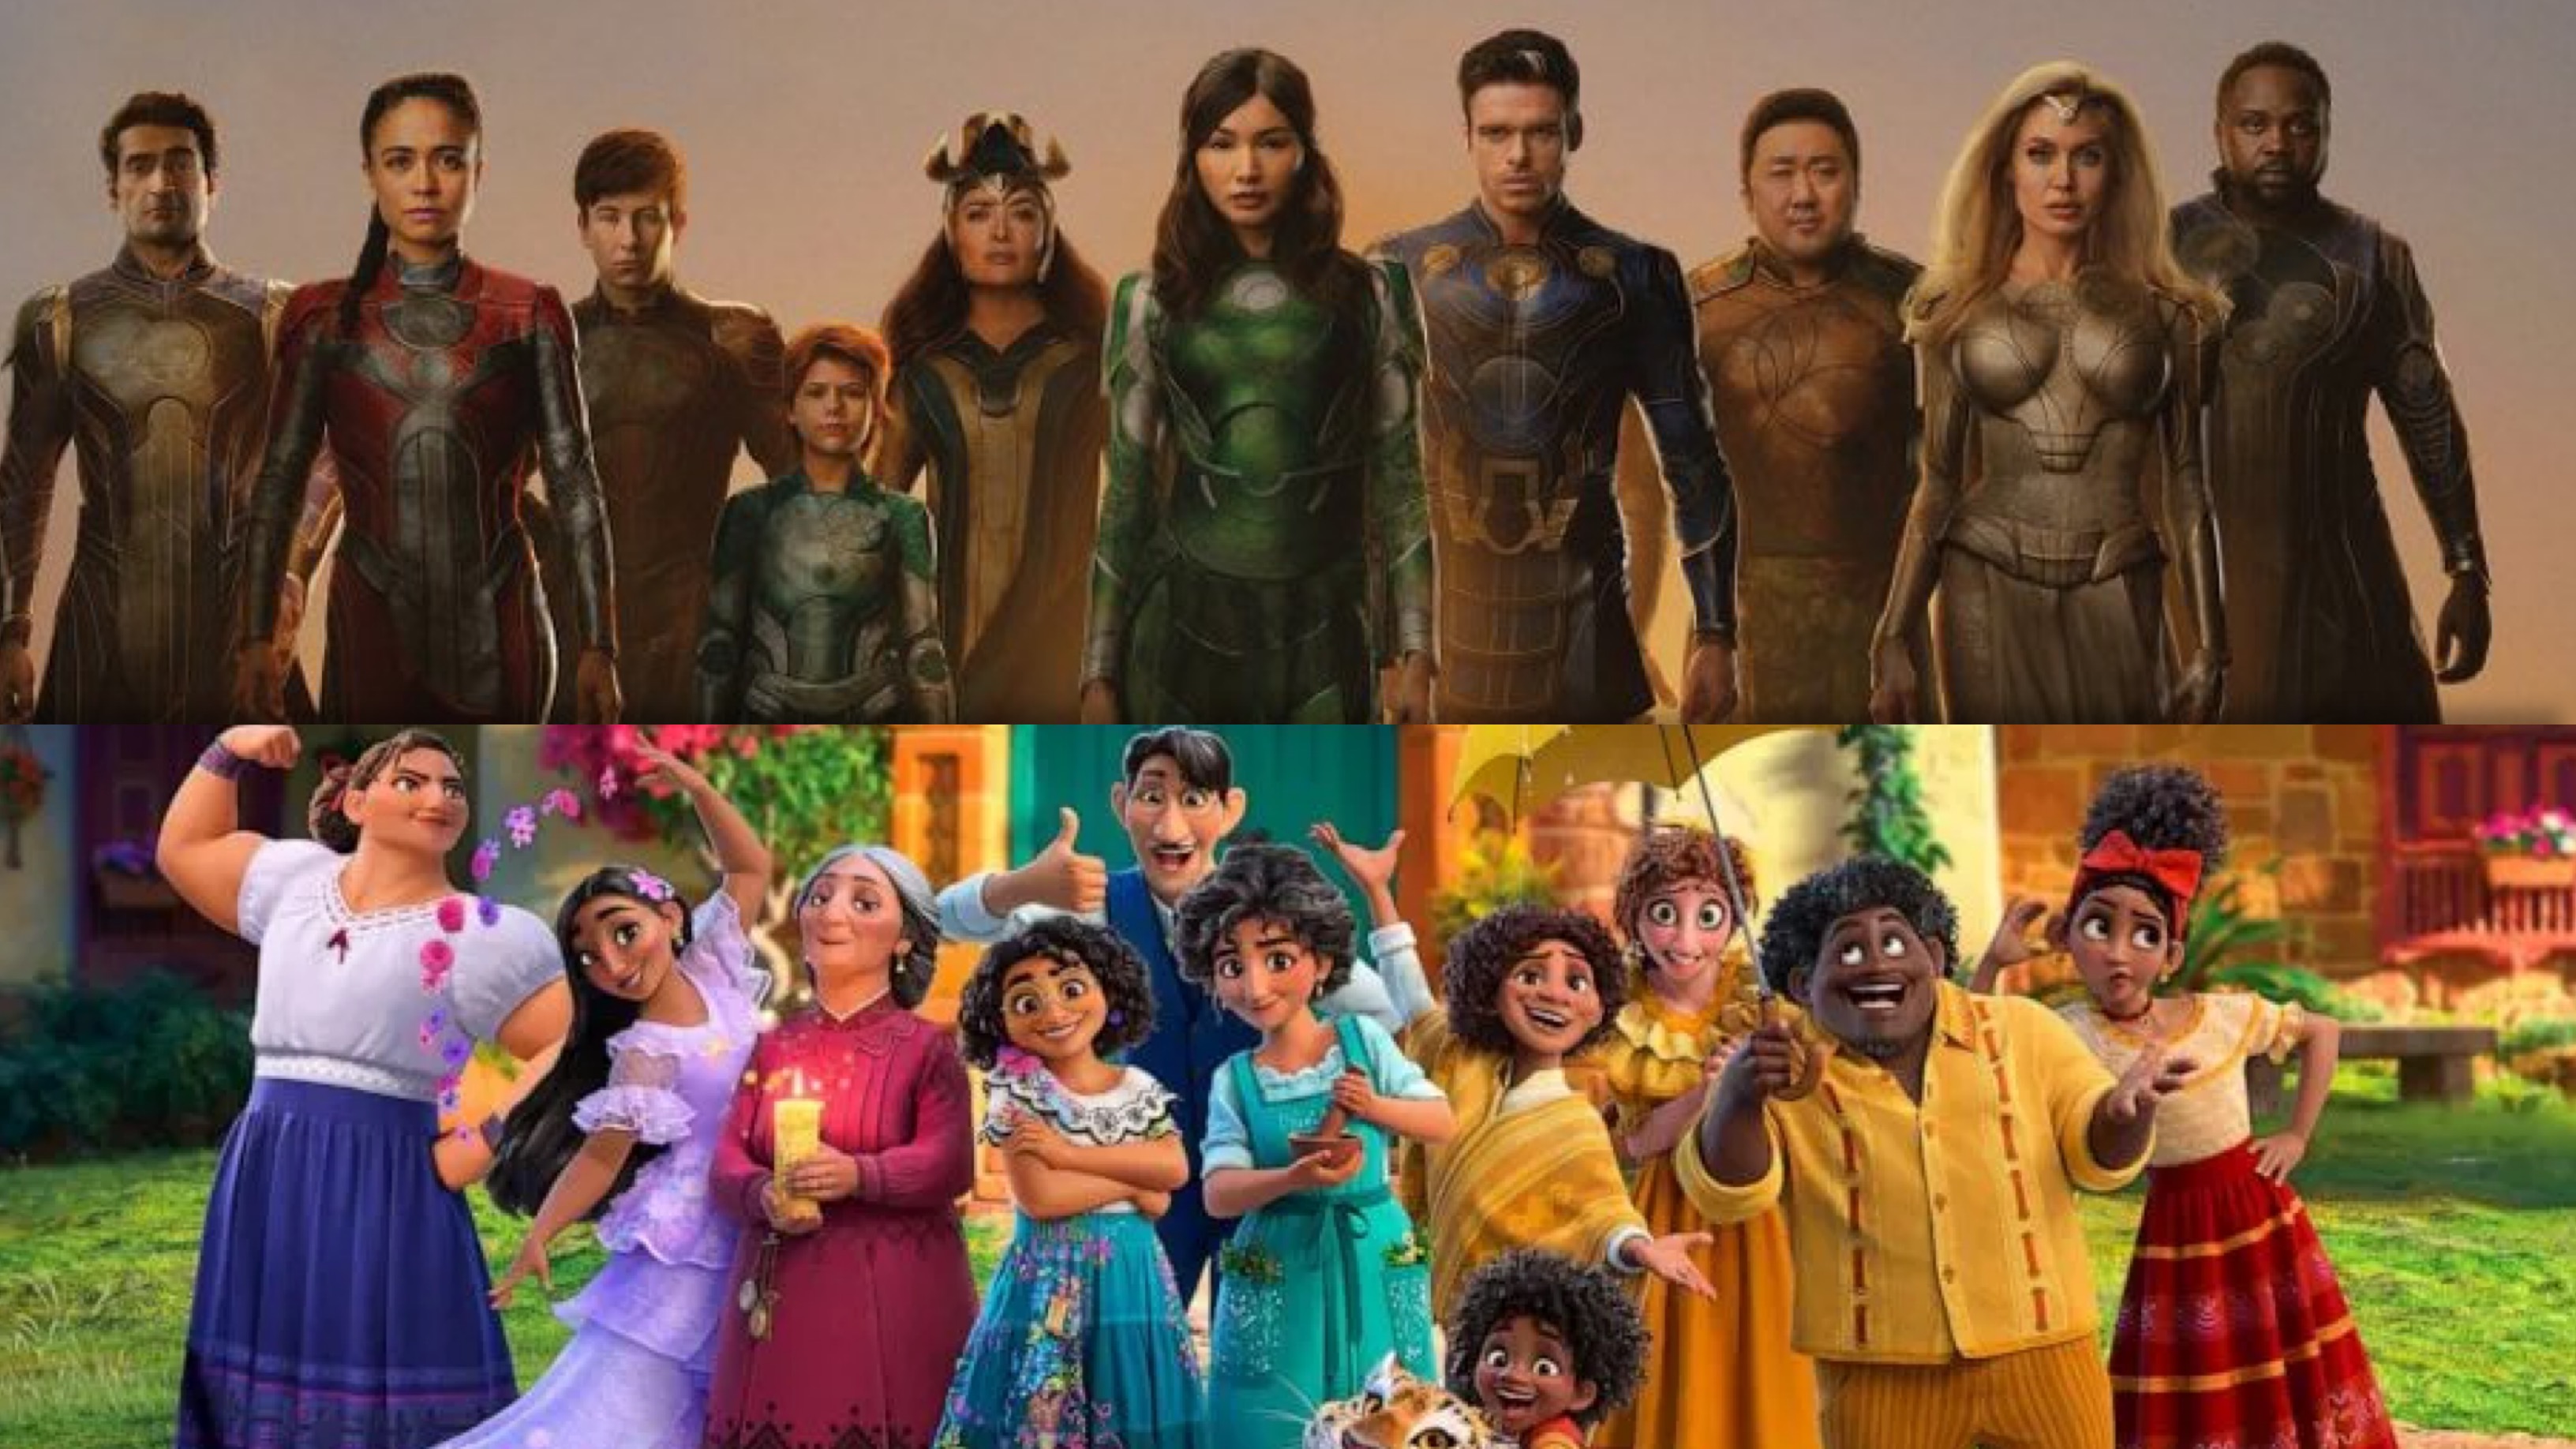 Disney Confirms The Rest of Their 2021 Film Slate Will Remain Exclusively Theatrical